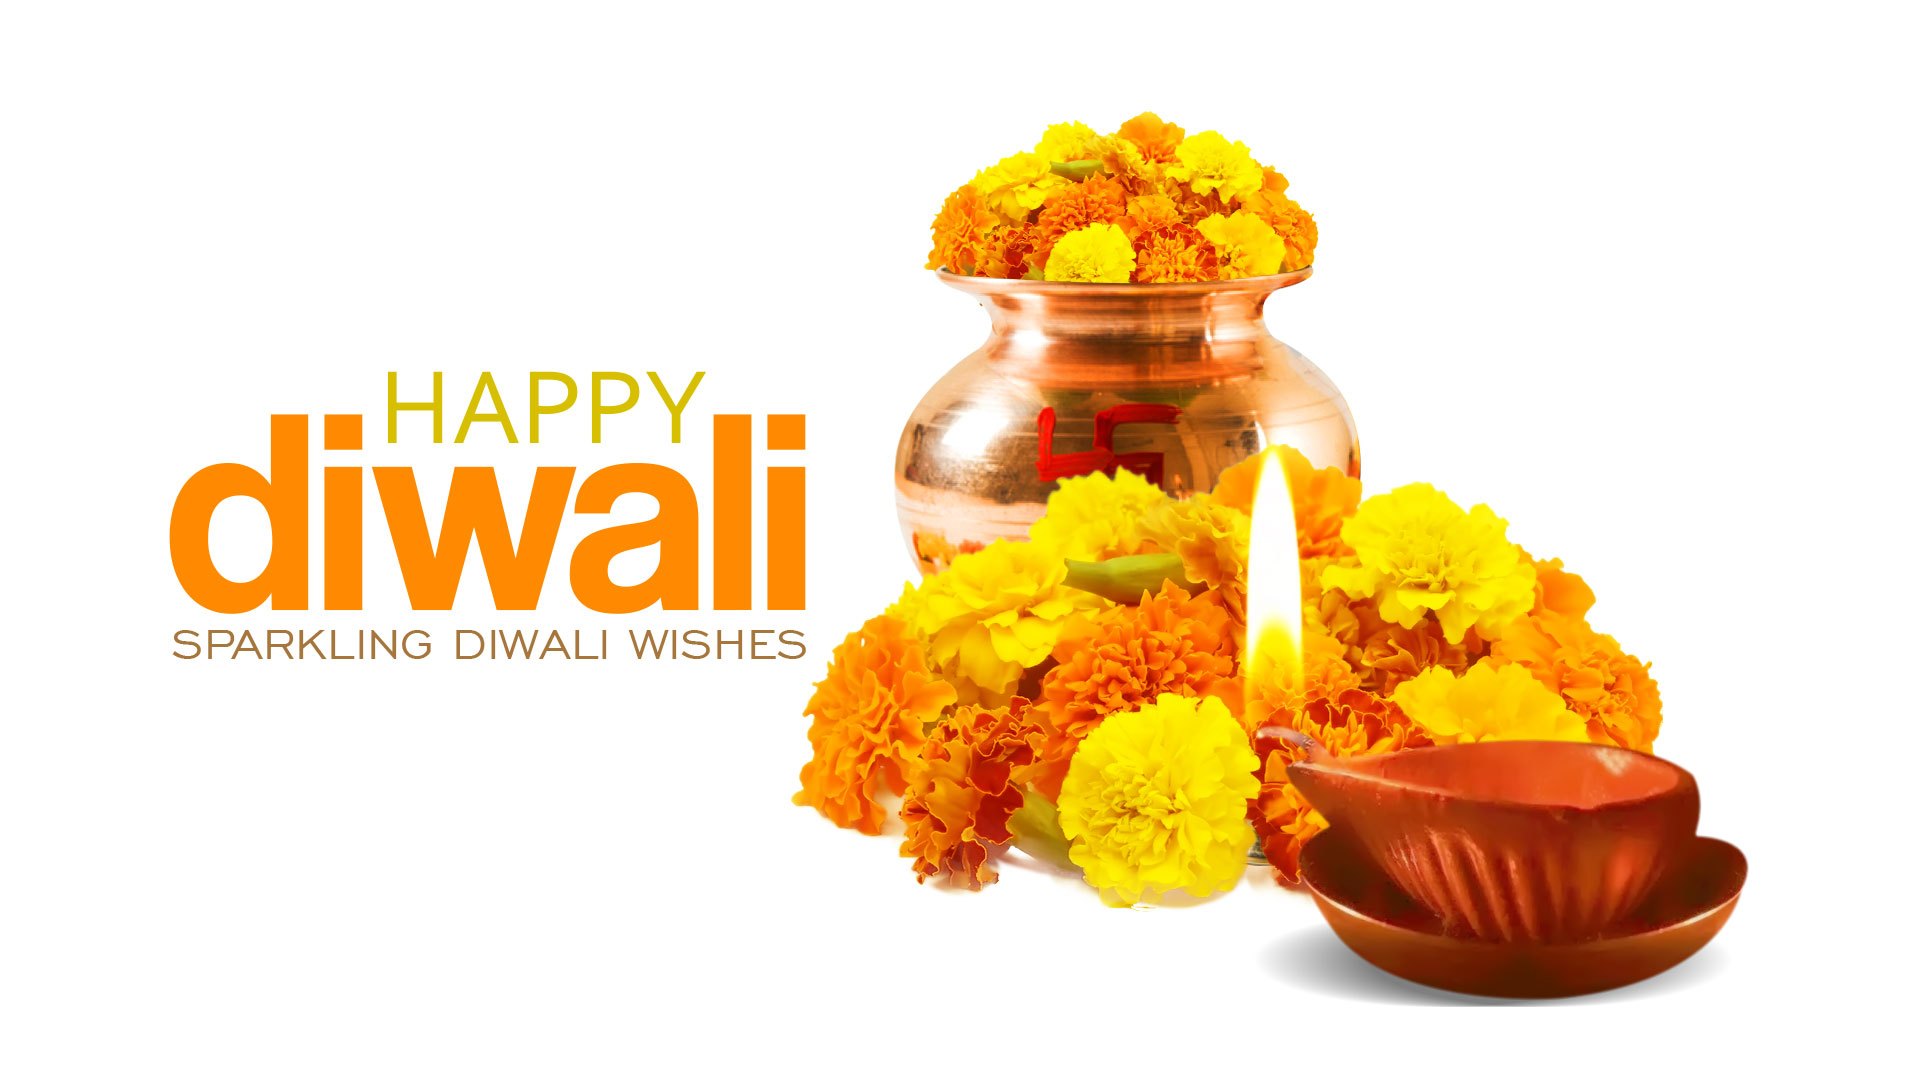 Diwali Images, Diwali Images Hd, Diwali Msg, Diwali - Happy Diwali Wishes Food , HD Wallpaper & Backgrounds